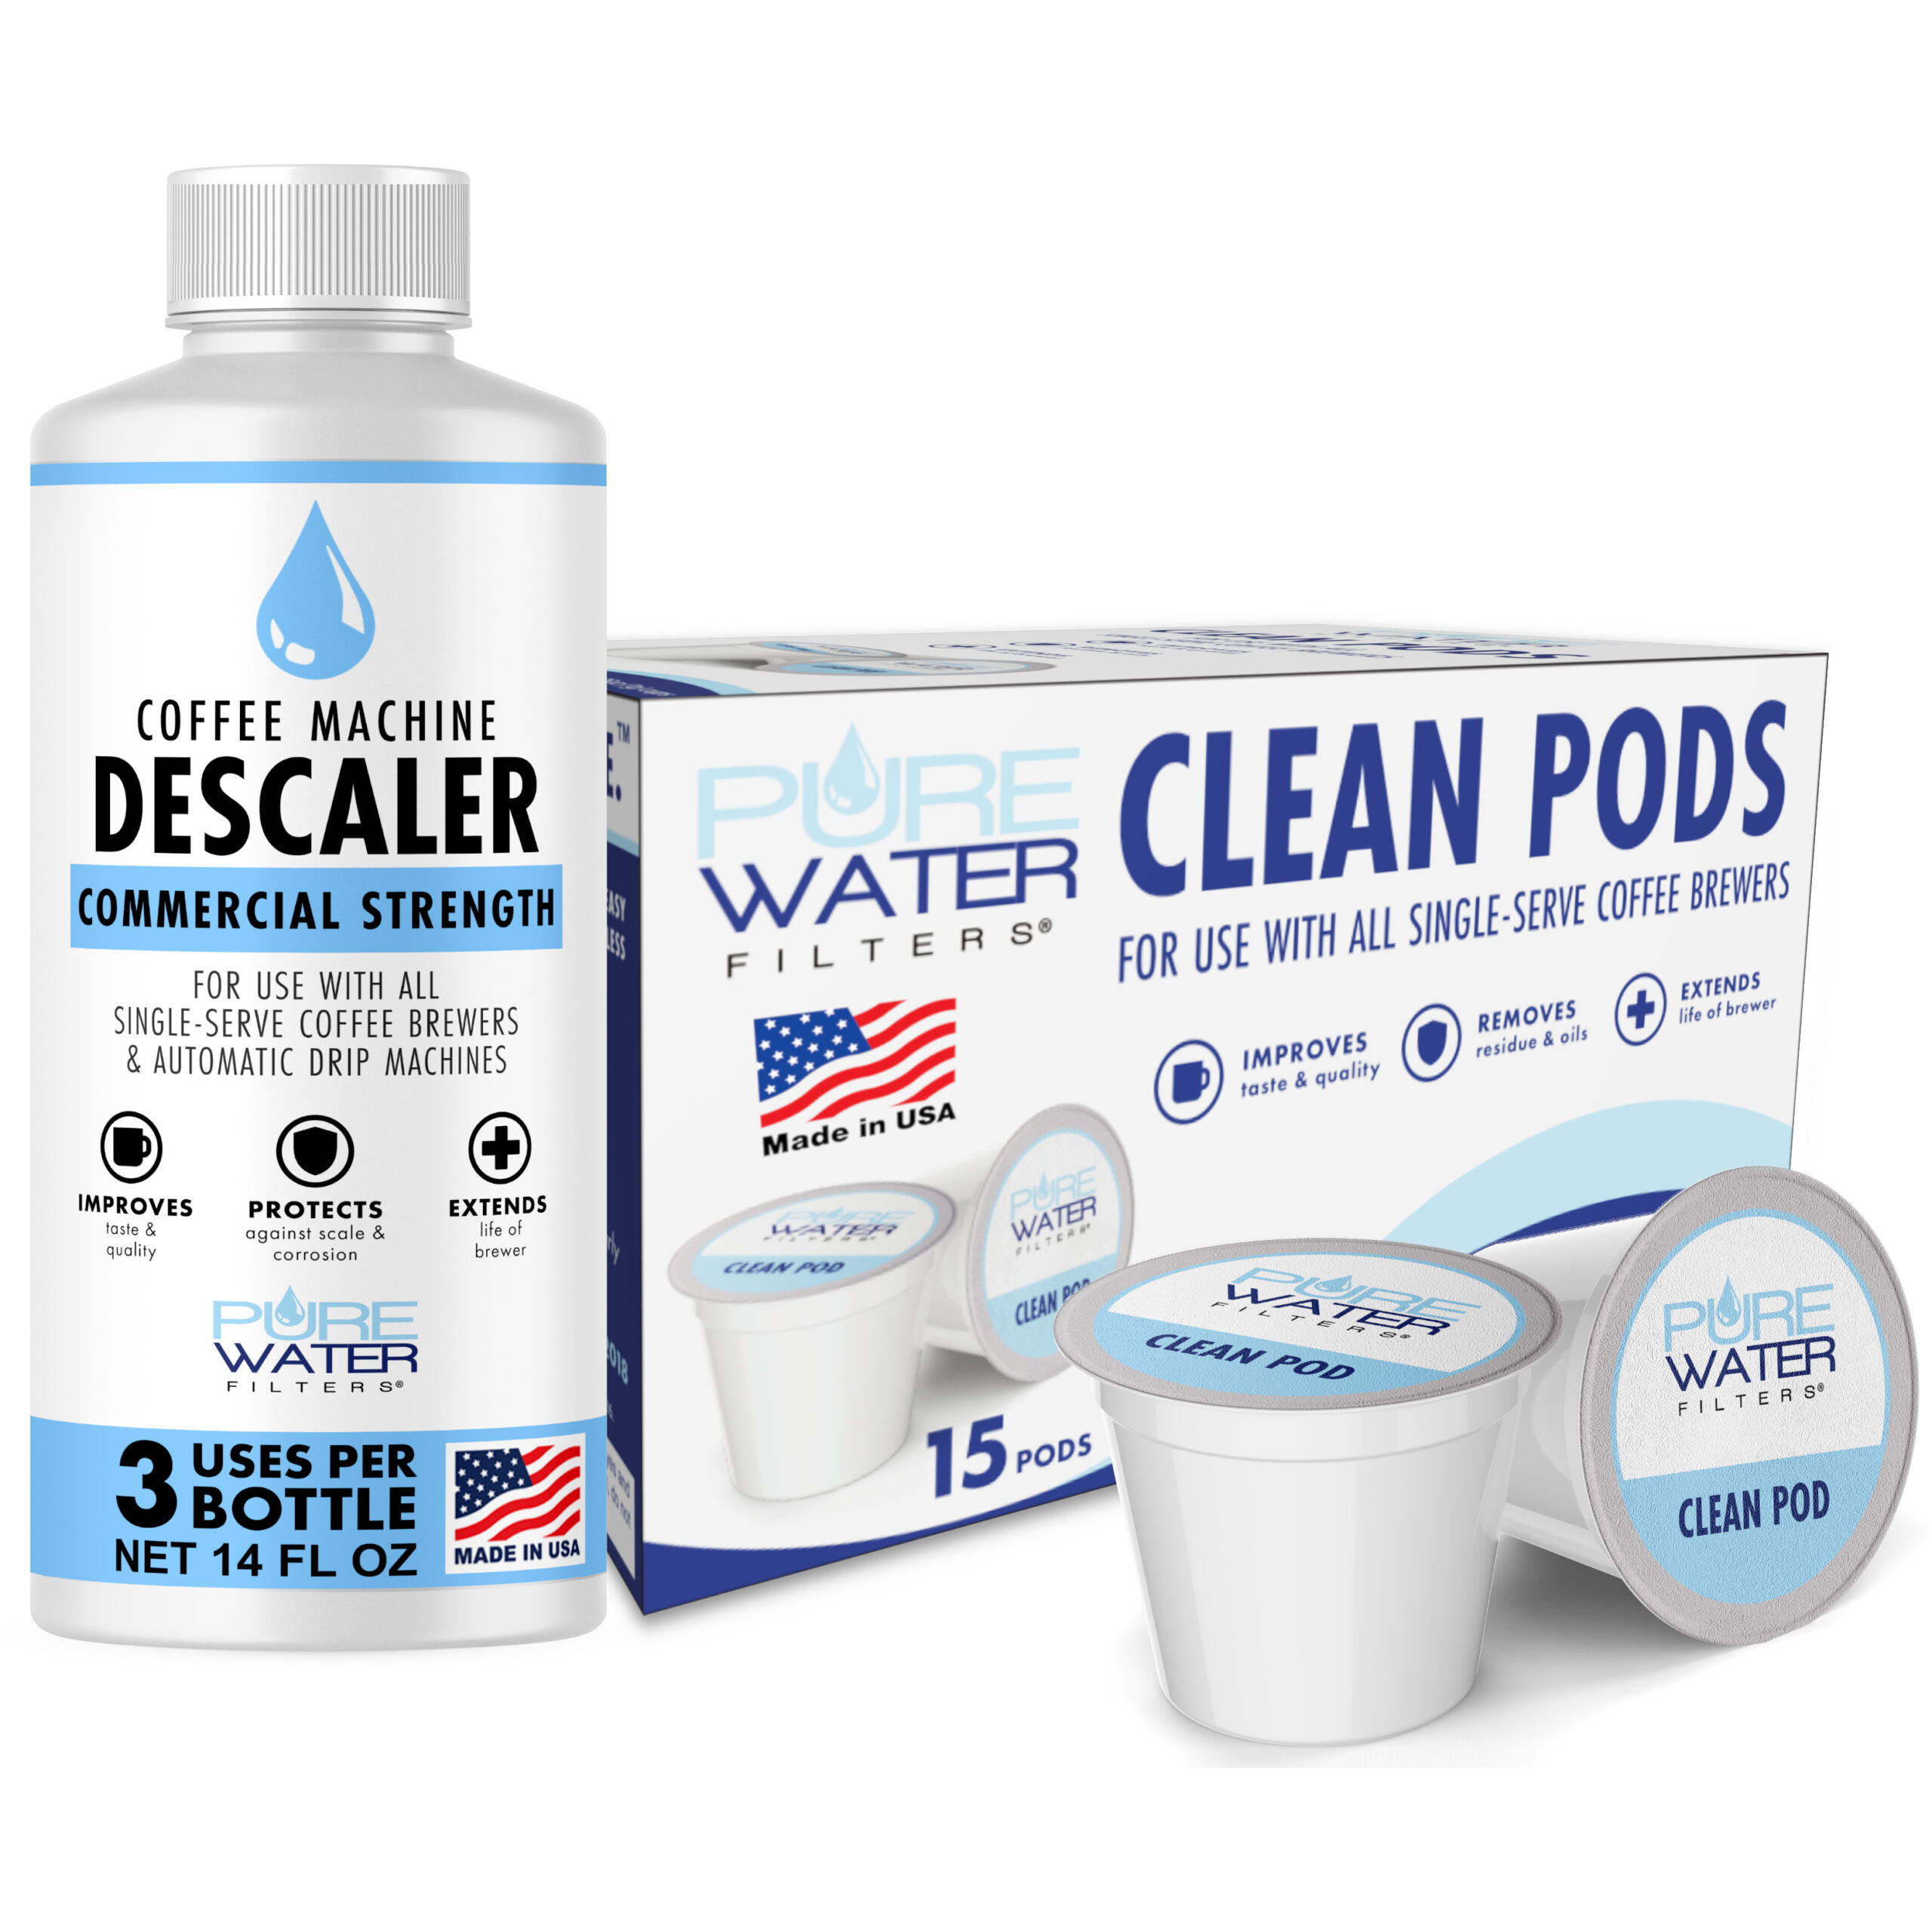 https://purewaterfilters.us/wp-content/uploads/2021/11/DescaleClean-main-1-scaled.jpg